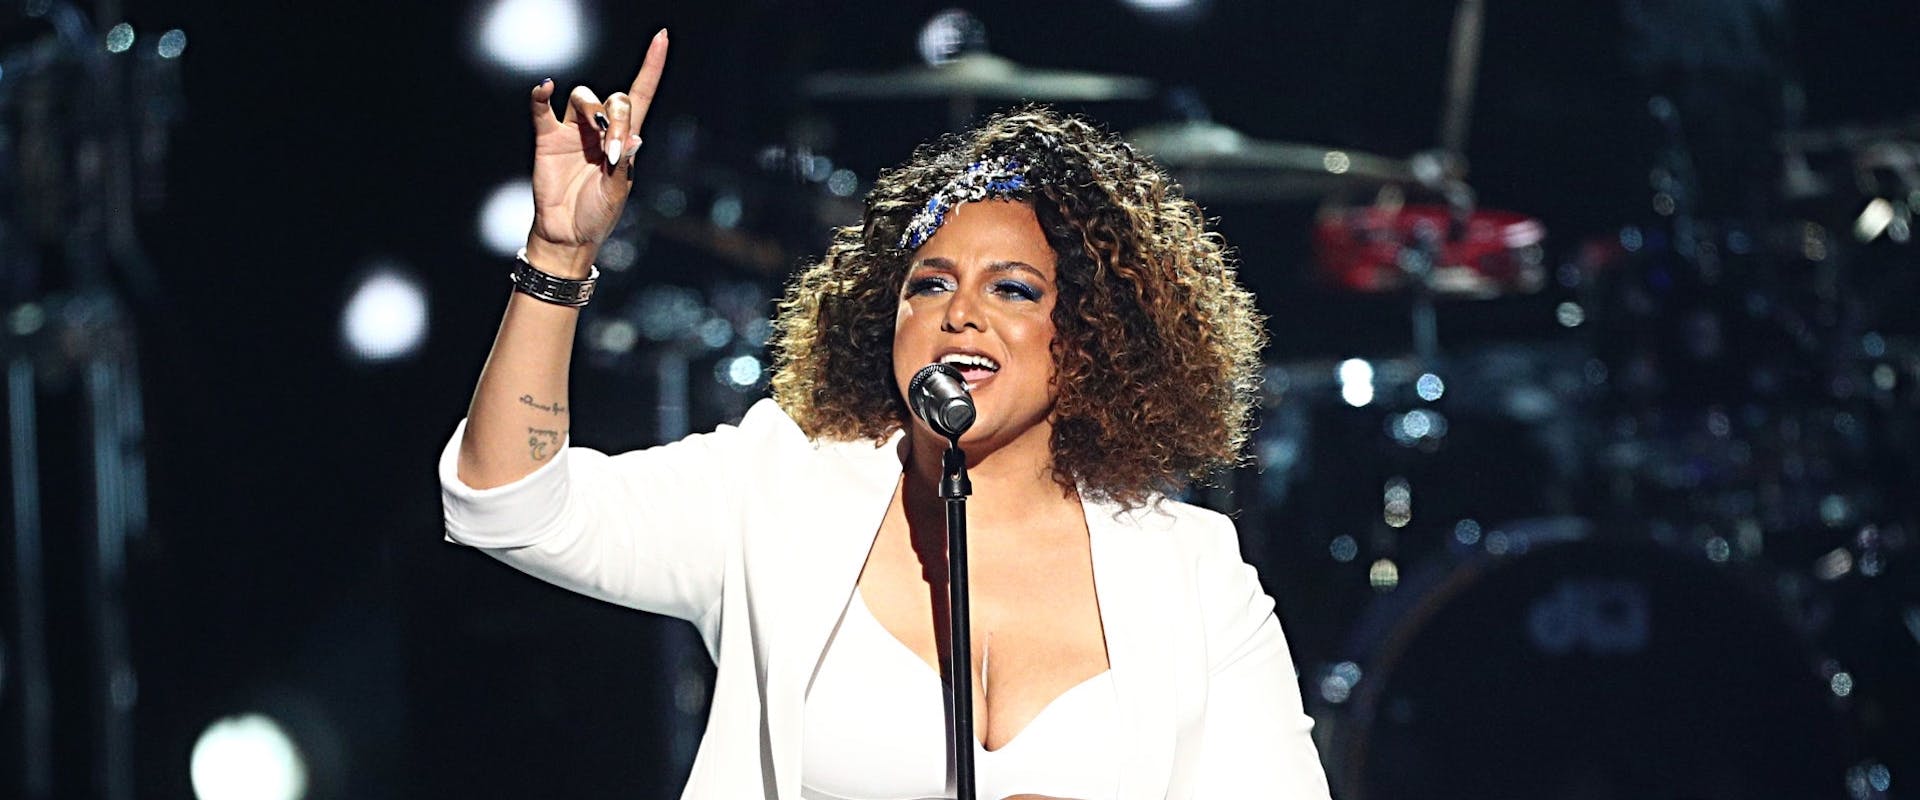 Marsha Ambrosius performs onstage at the 2019 BET Awards at Microsoft Theater on June 23, 2019 in Los Angeles, California. 